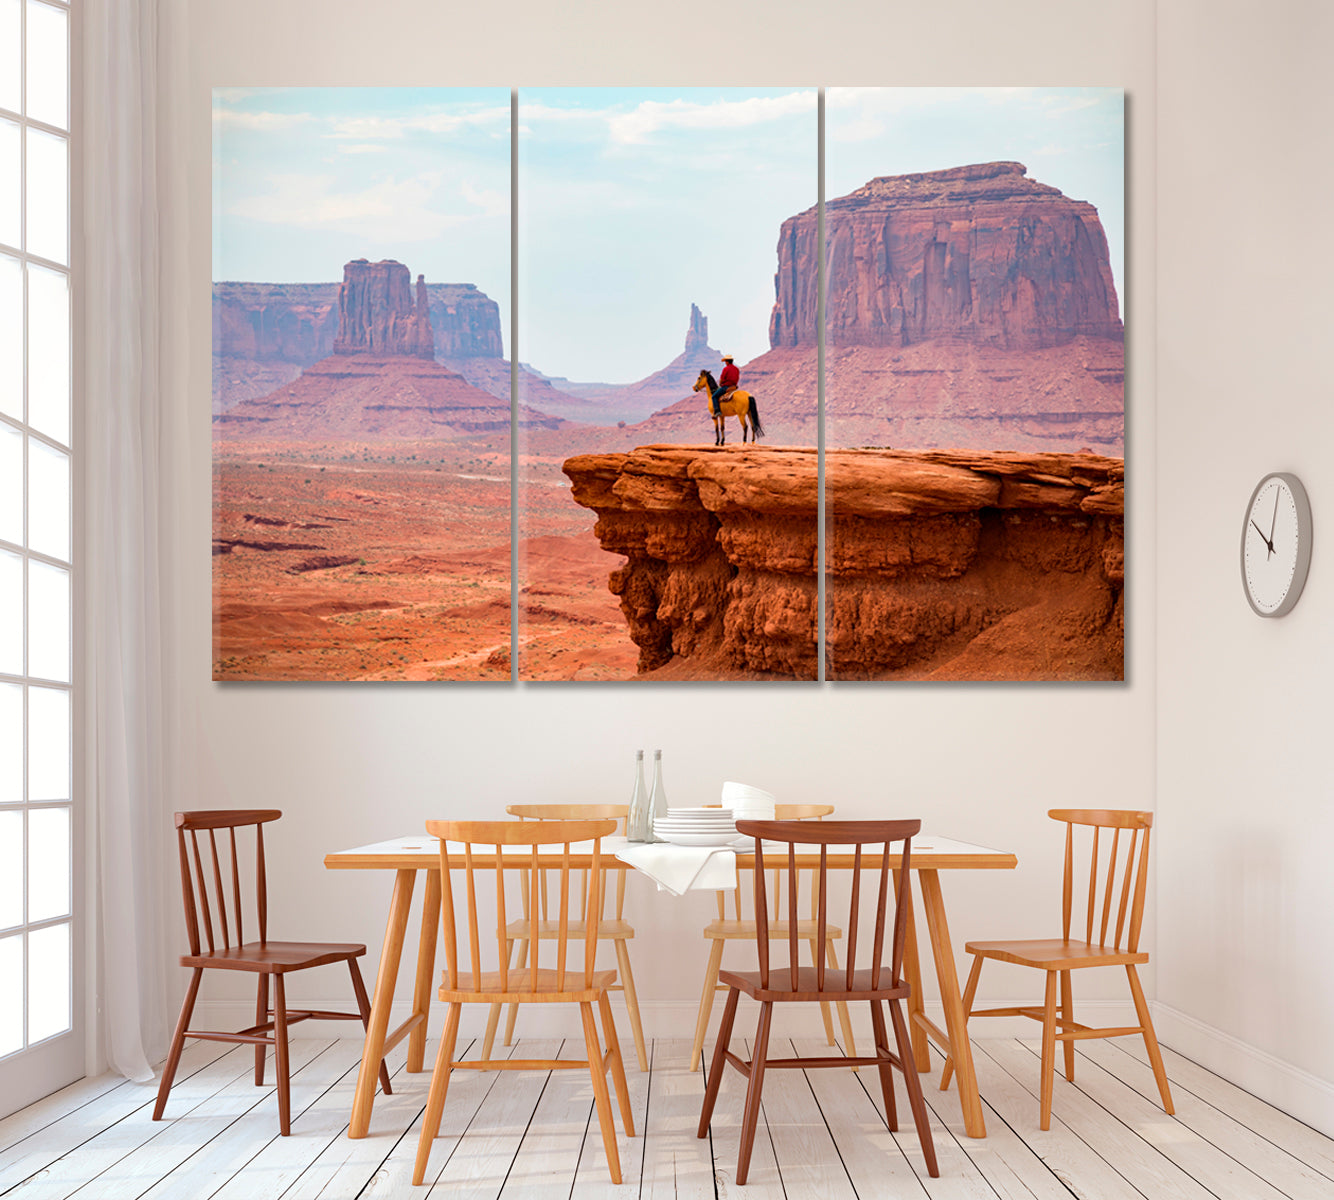 Cowboy on Horse in Monument Valley Tribal Park Arizona Canvas Print ArtLexy 3 Panels 36"x24" inches 